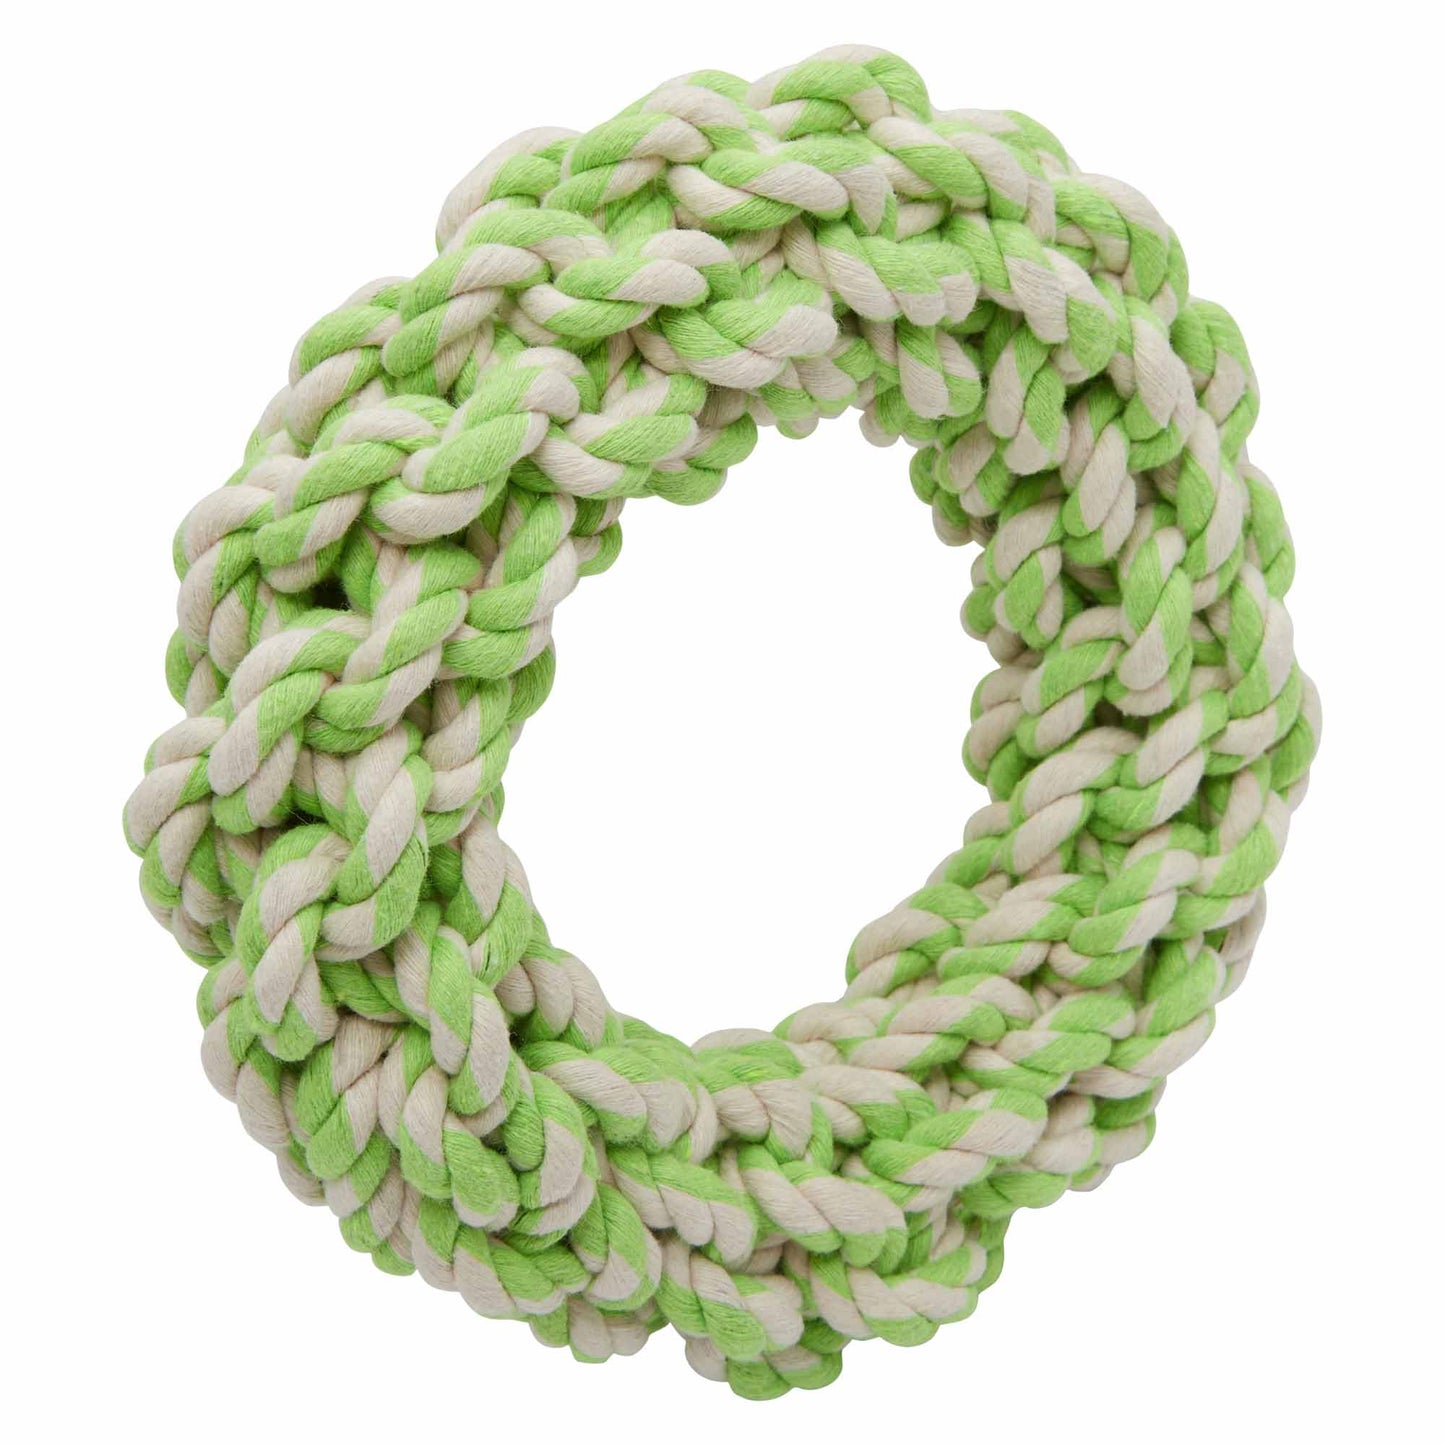 Lexi & Me Rope Toy Ring